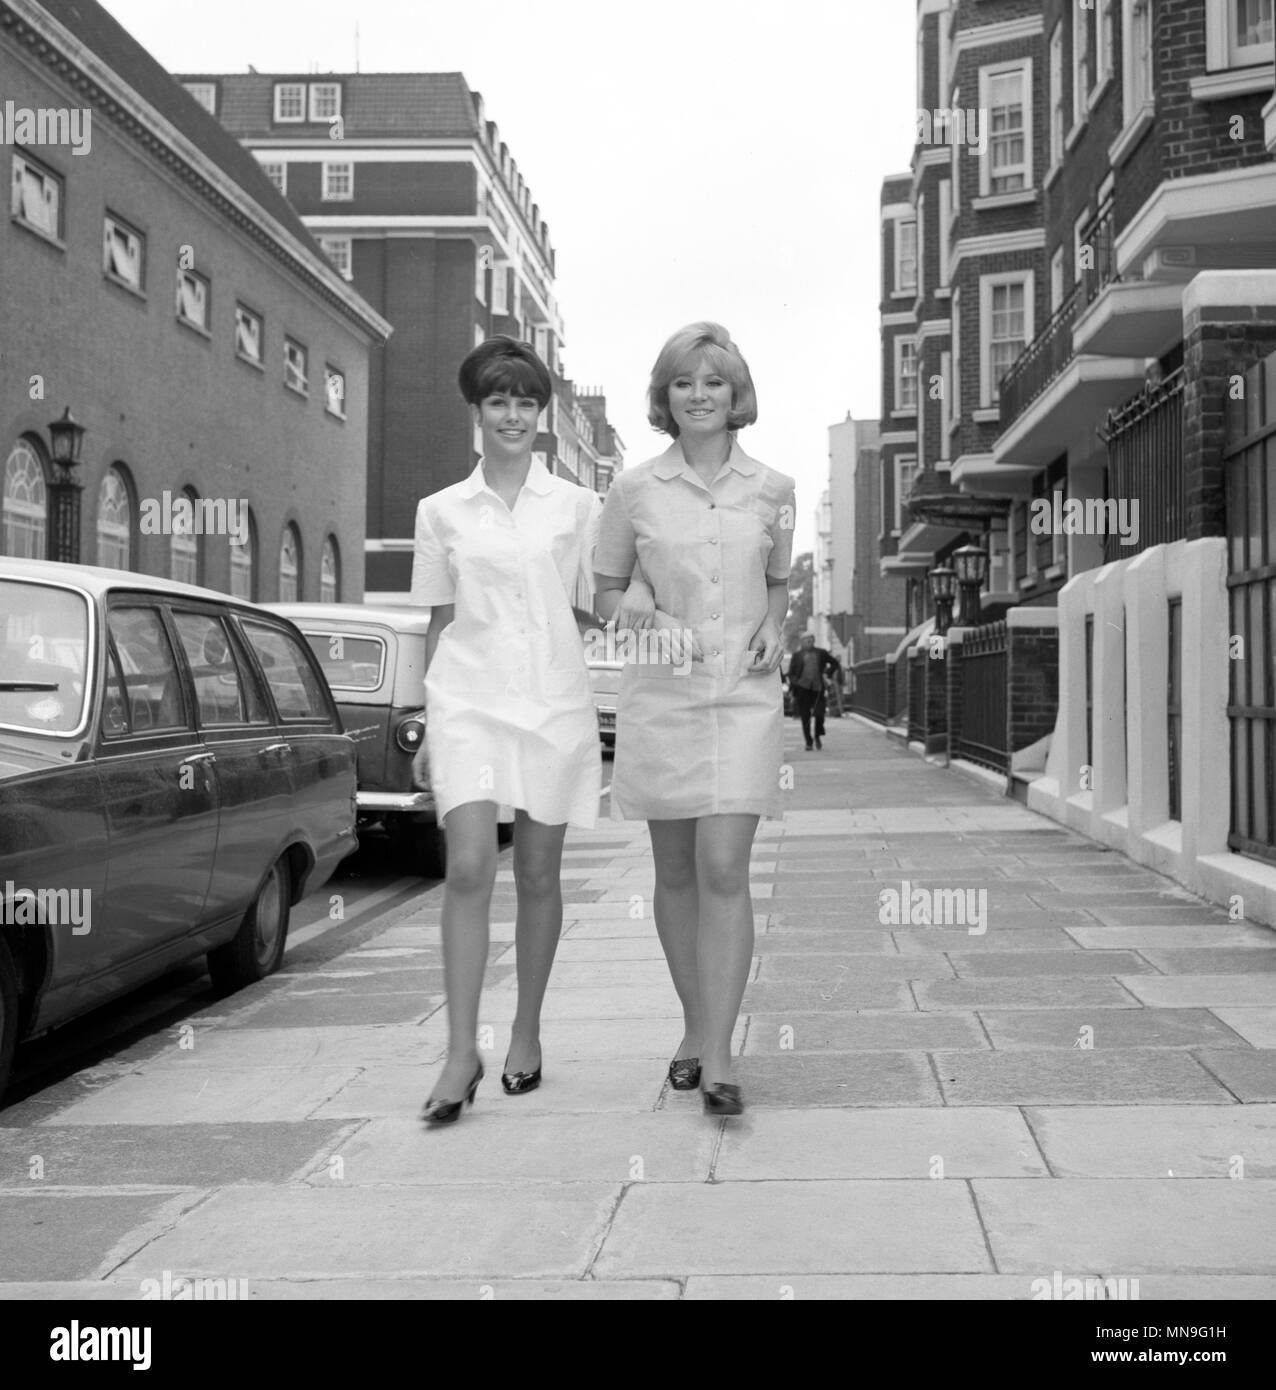 Janet Gale (l) and Christine Pryor, in London, wearing revolutionary national style disposable dresses which are a designed by E & R Garrould Ltd, of London. The girls are on their way to the company's stand at the London Nursing Exhibition, which opens at the Seymour Hall, London. The dresses are made of disposable fabric, with the uniform designed to the recommended style of the National Health Service work group, whose report was published recently. Stock Photo